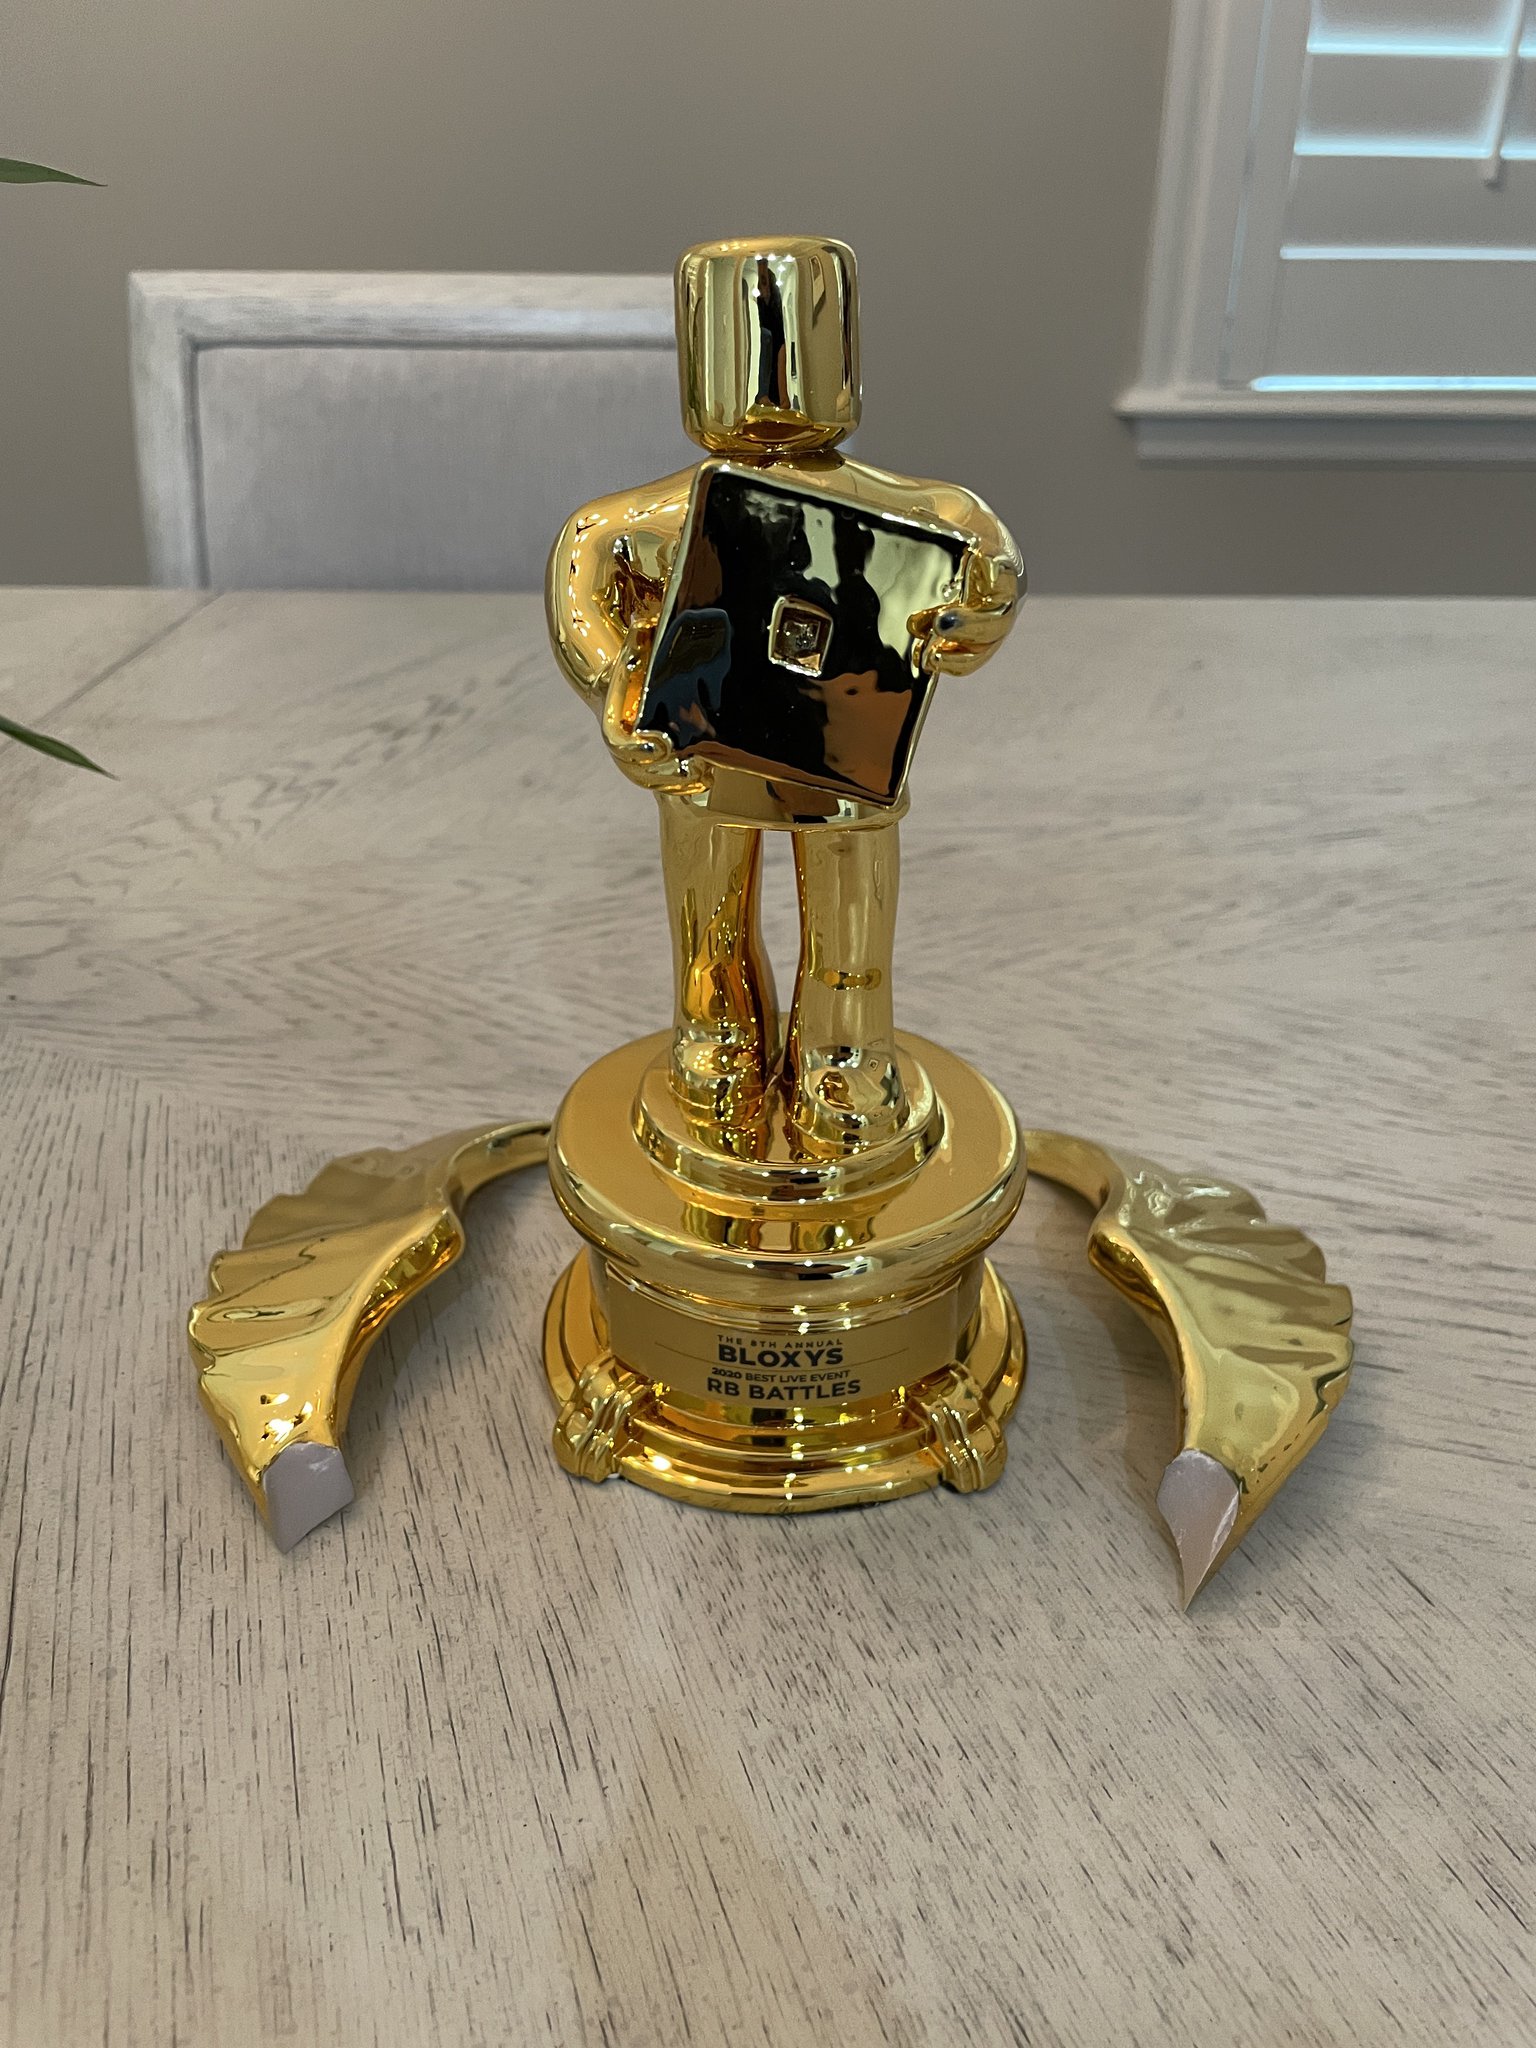 Rb Battles On Twitter We Just Received Our Bloxy Award For Best Live 